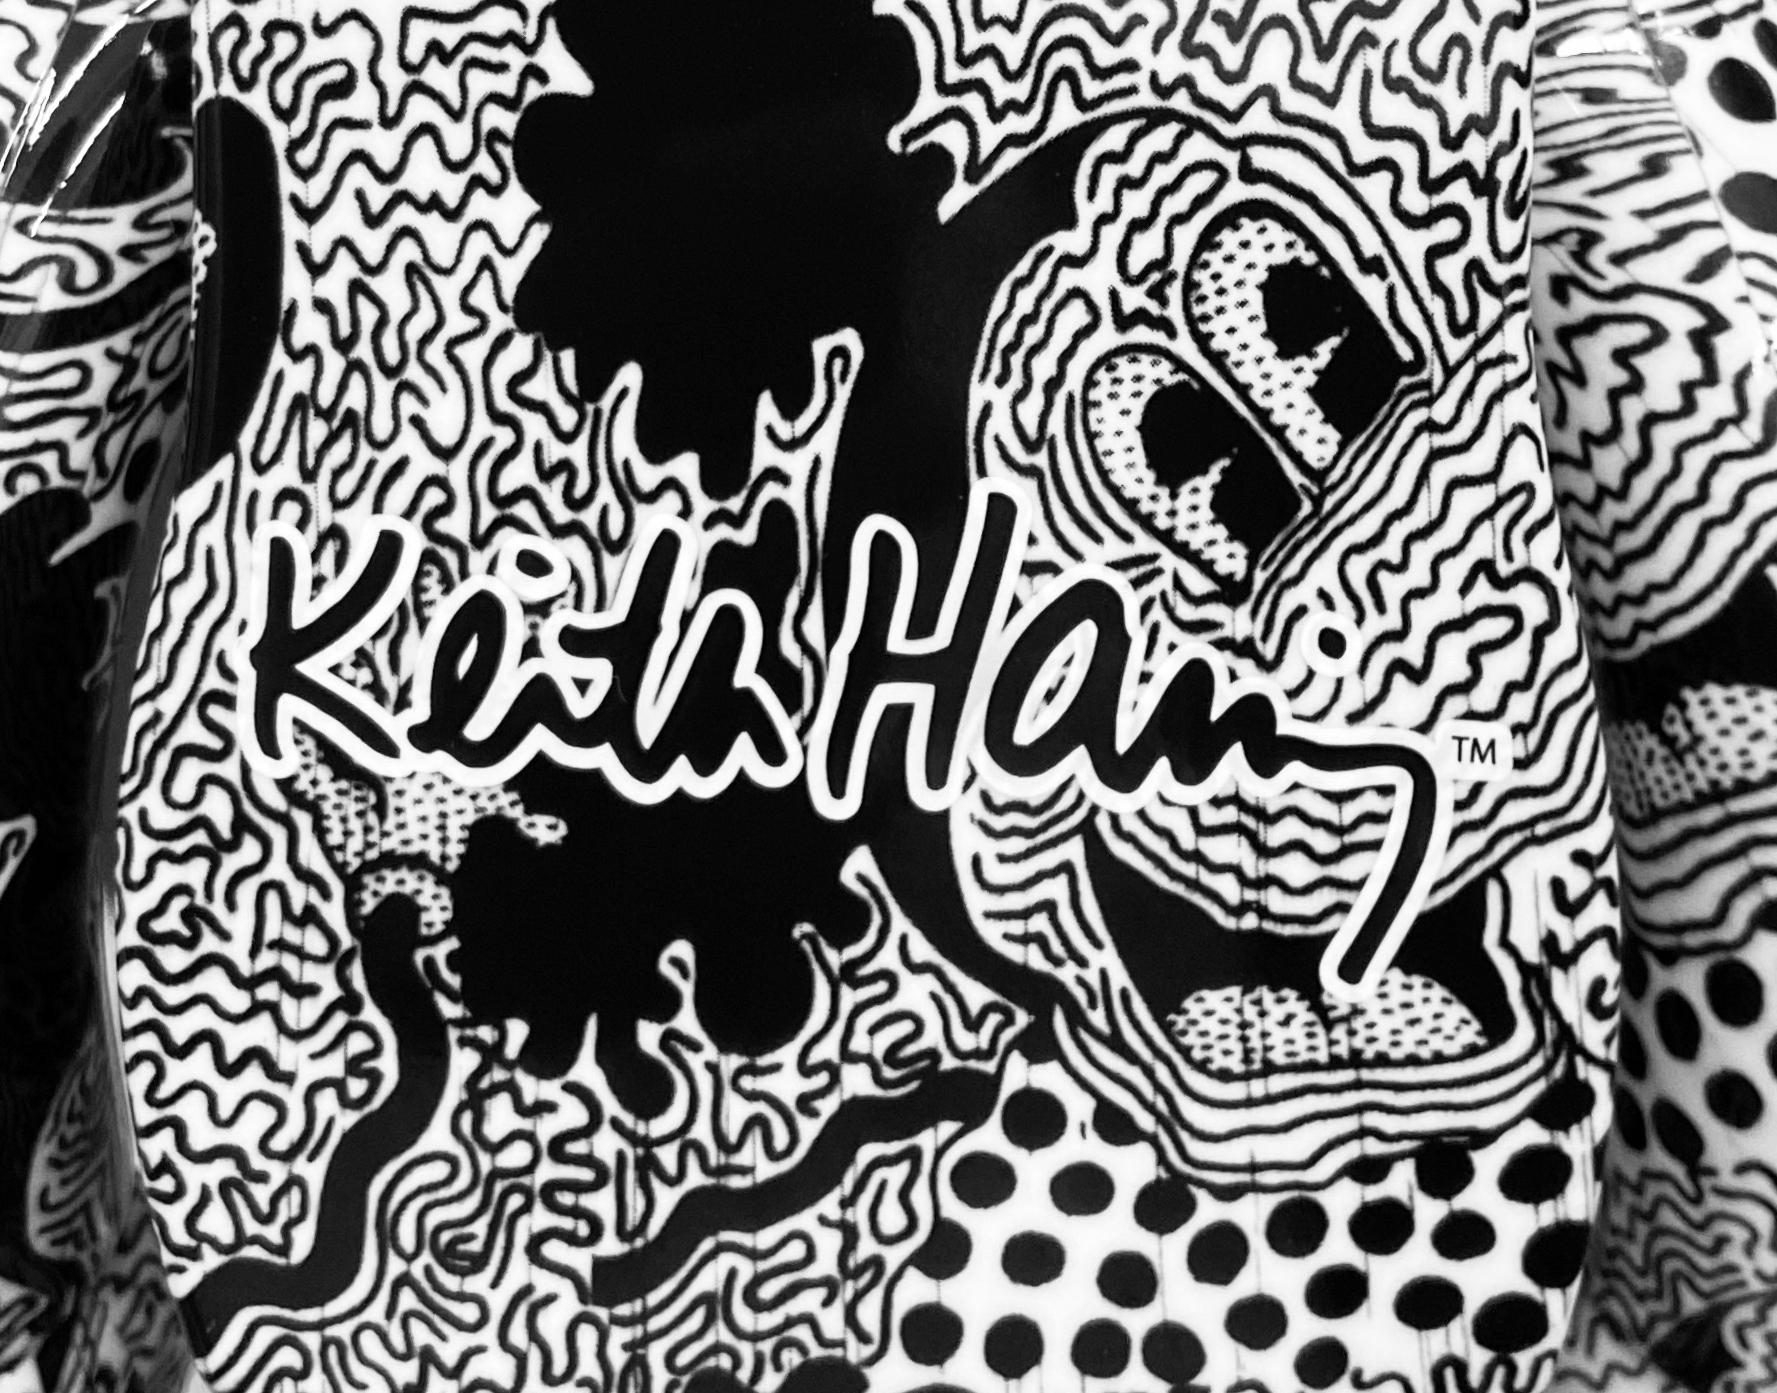 Keith Haring Bearbrick 400 % Figur (Haring Mickey Mouse BE@RBRICK) im Angebot 1